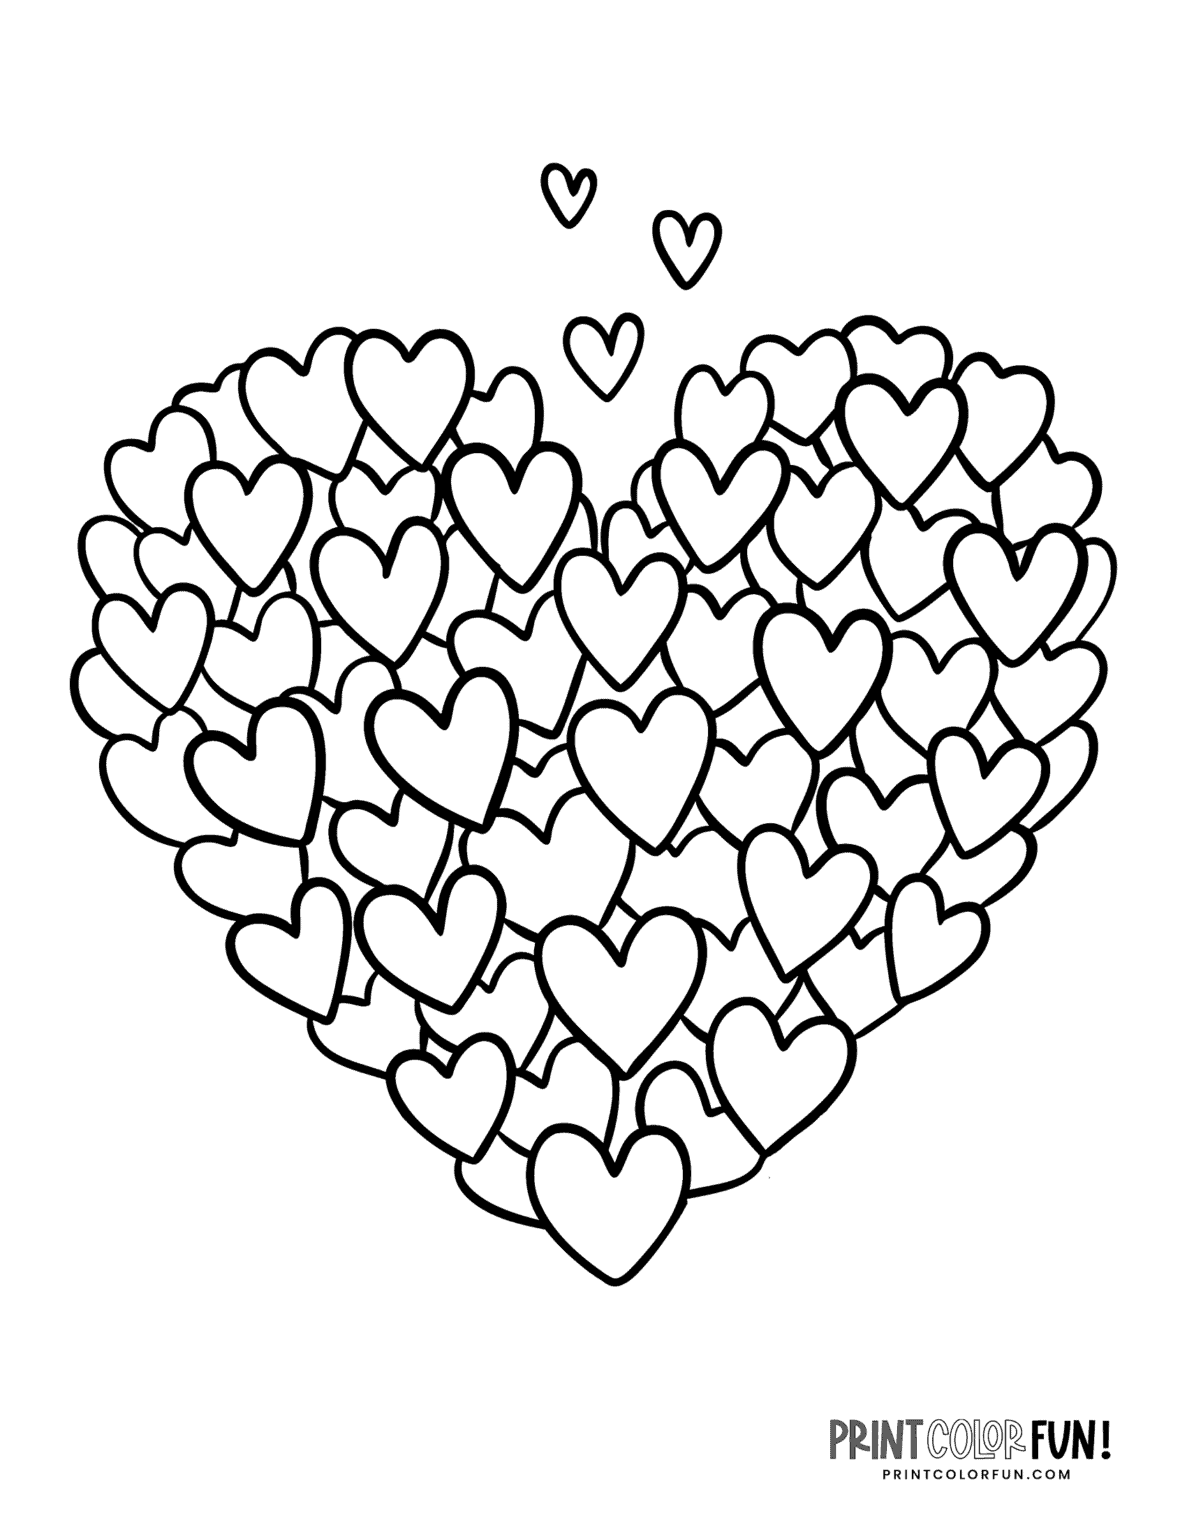 100+ printable heart coloring pages A huge collection of hearts for